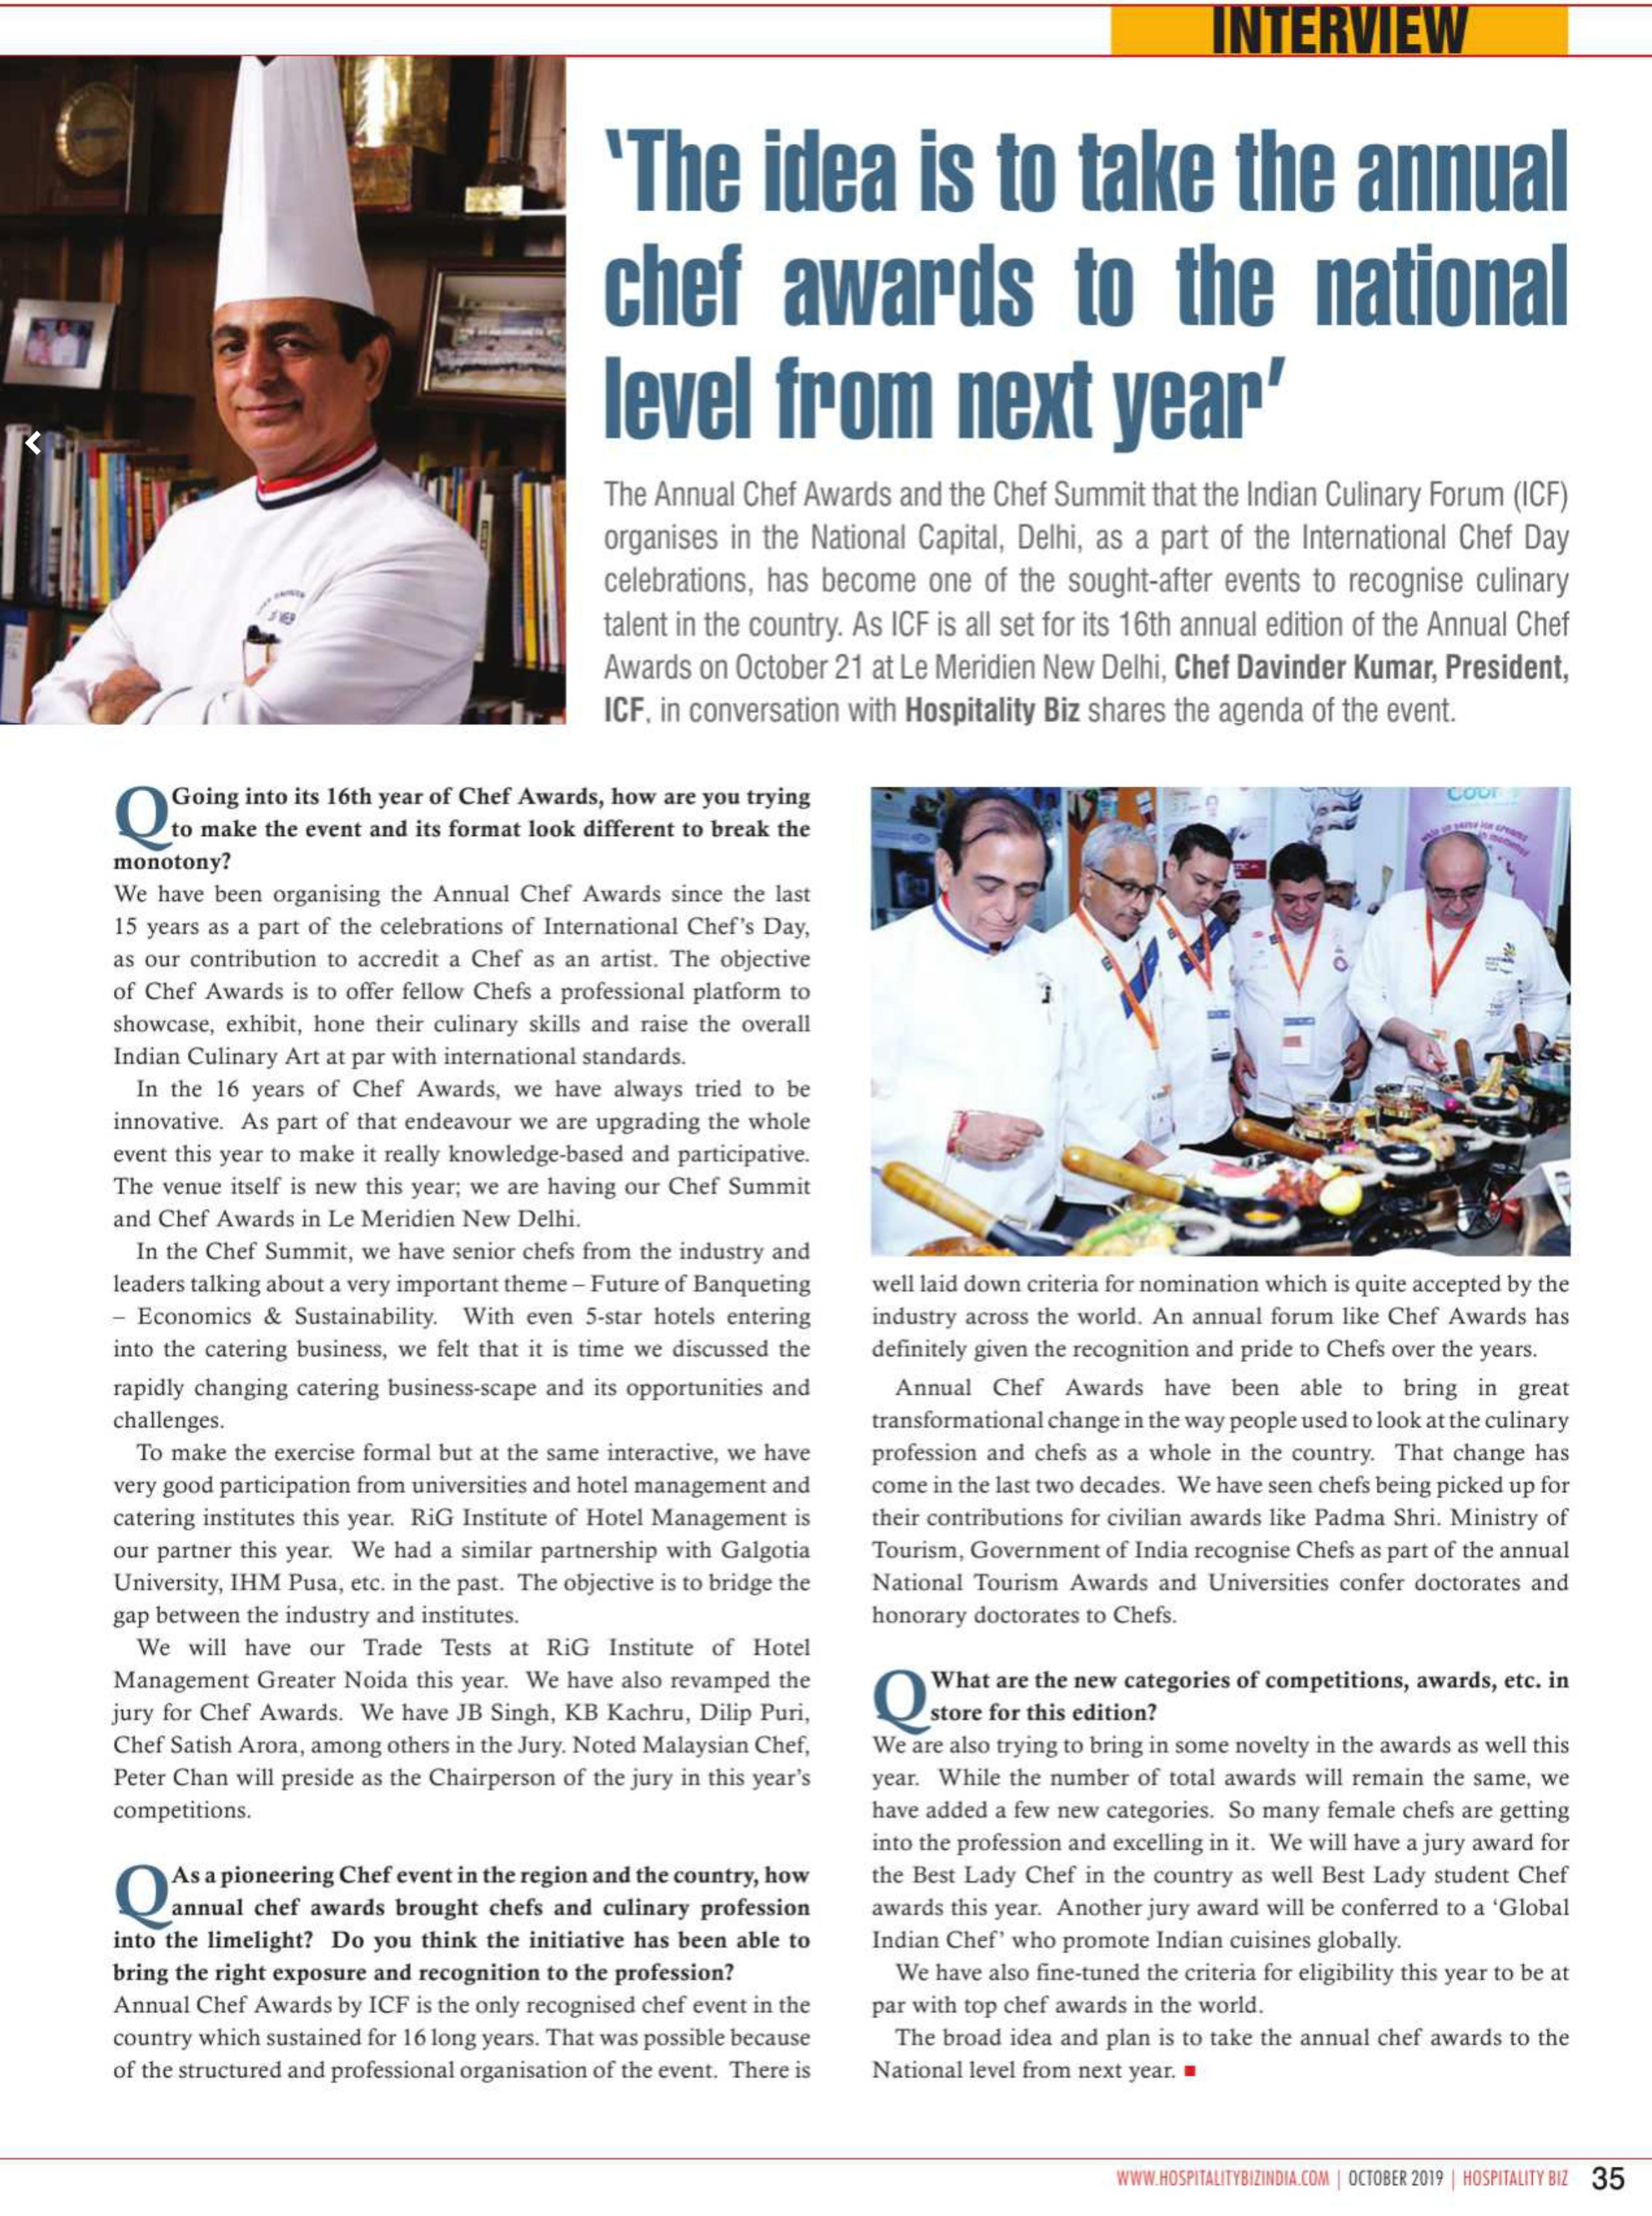 The idea is to take the annual chef awards to the national level from next year